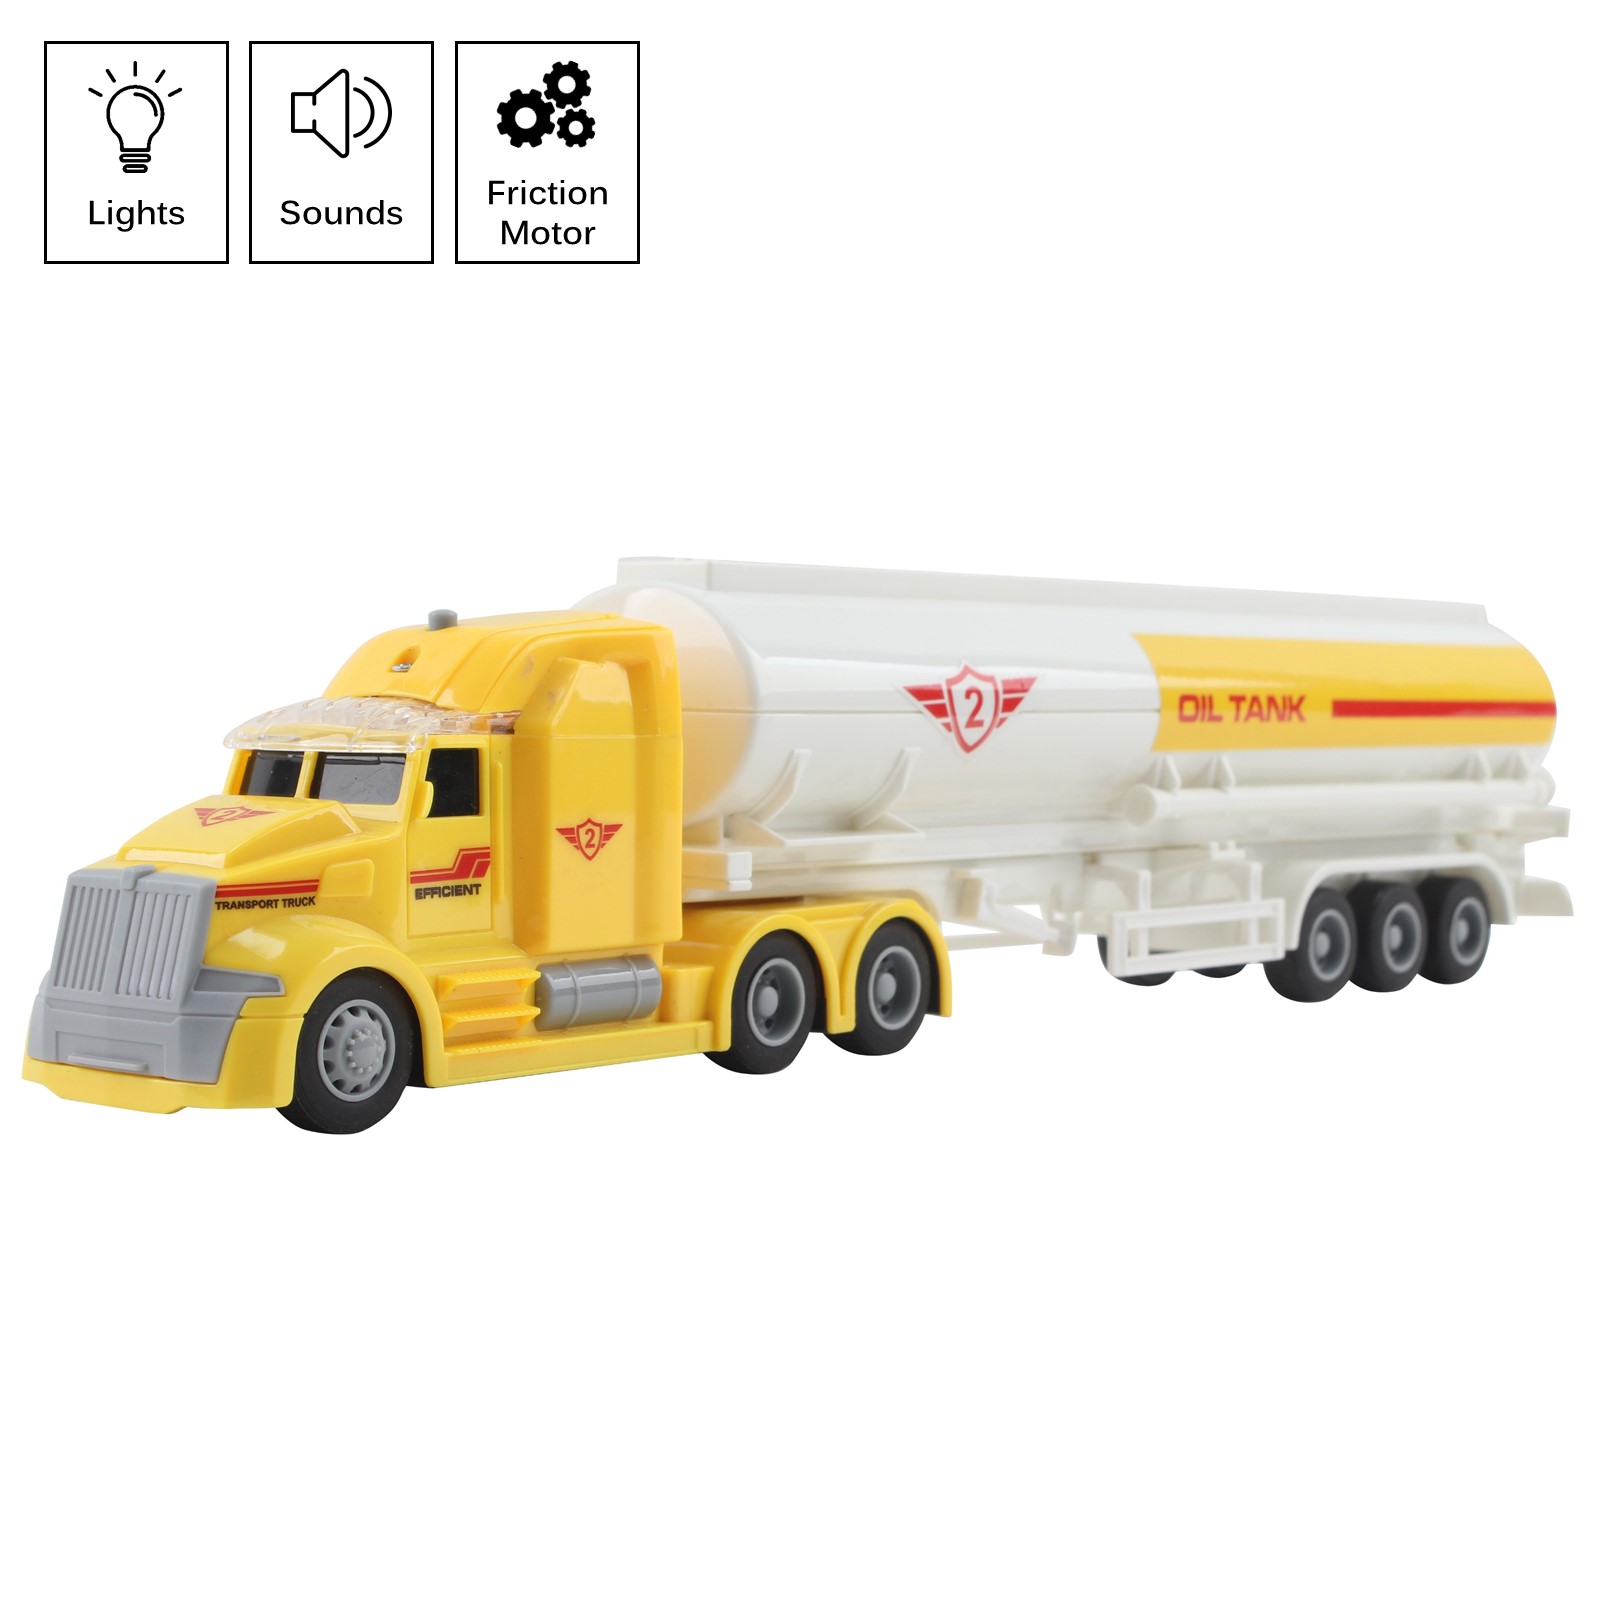 Toy Semi Truck Fuel Trailer 14.5" Friction Powered With Lights And Sound Kids Push And Go Big Rig Oil Carrier Vehicle Transporter Semi-Truck Pretend Play Car Great Gift For Children Boys Girls